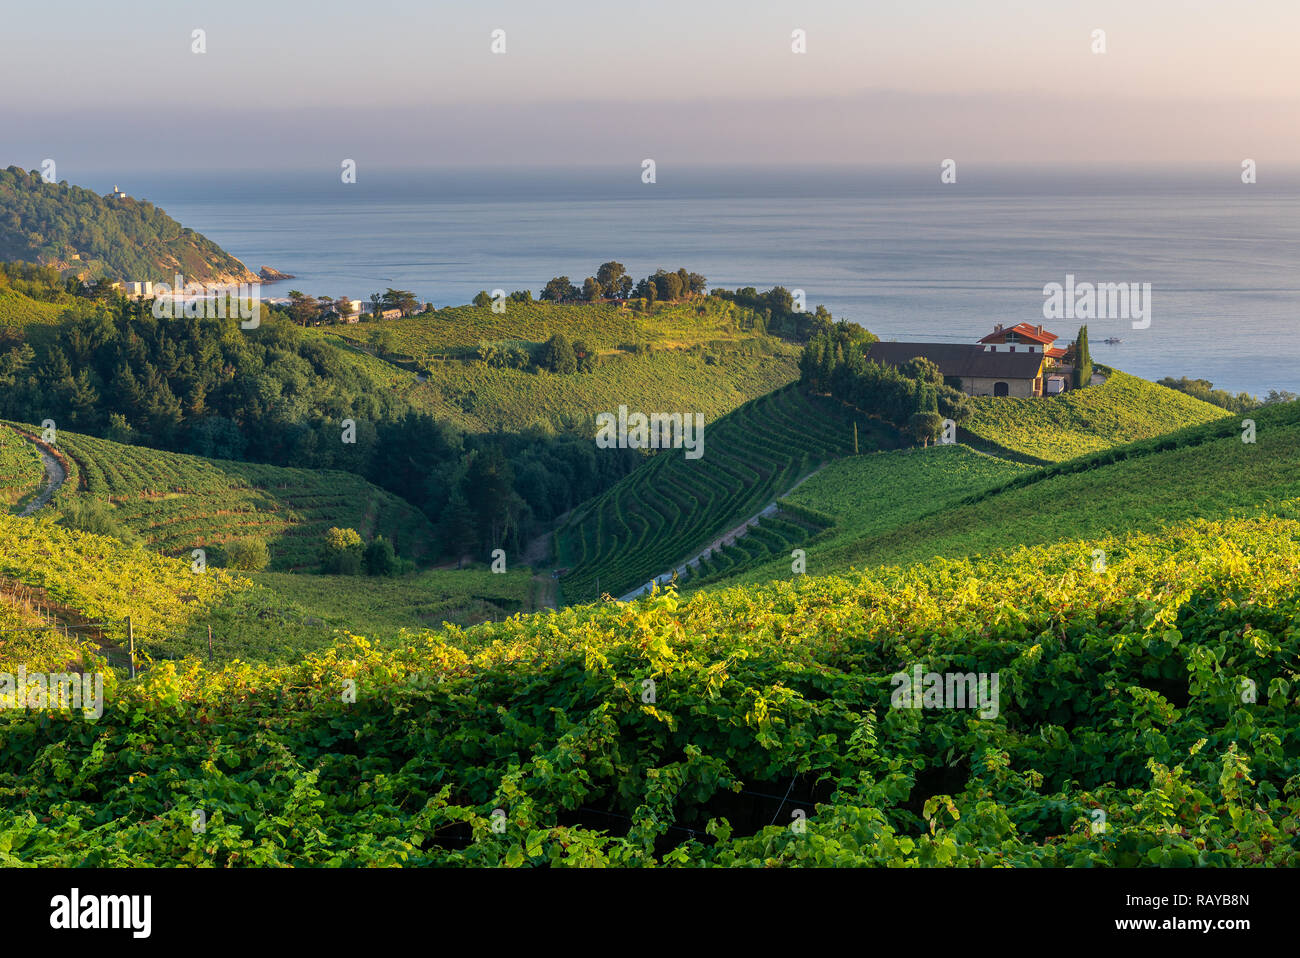 Txakoli vineyards with Cantabrian sea in the background, Getaria in Basque Country, Spain Stock Photo